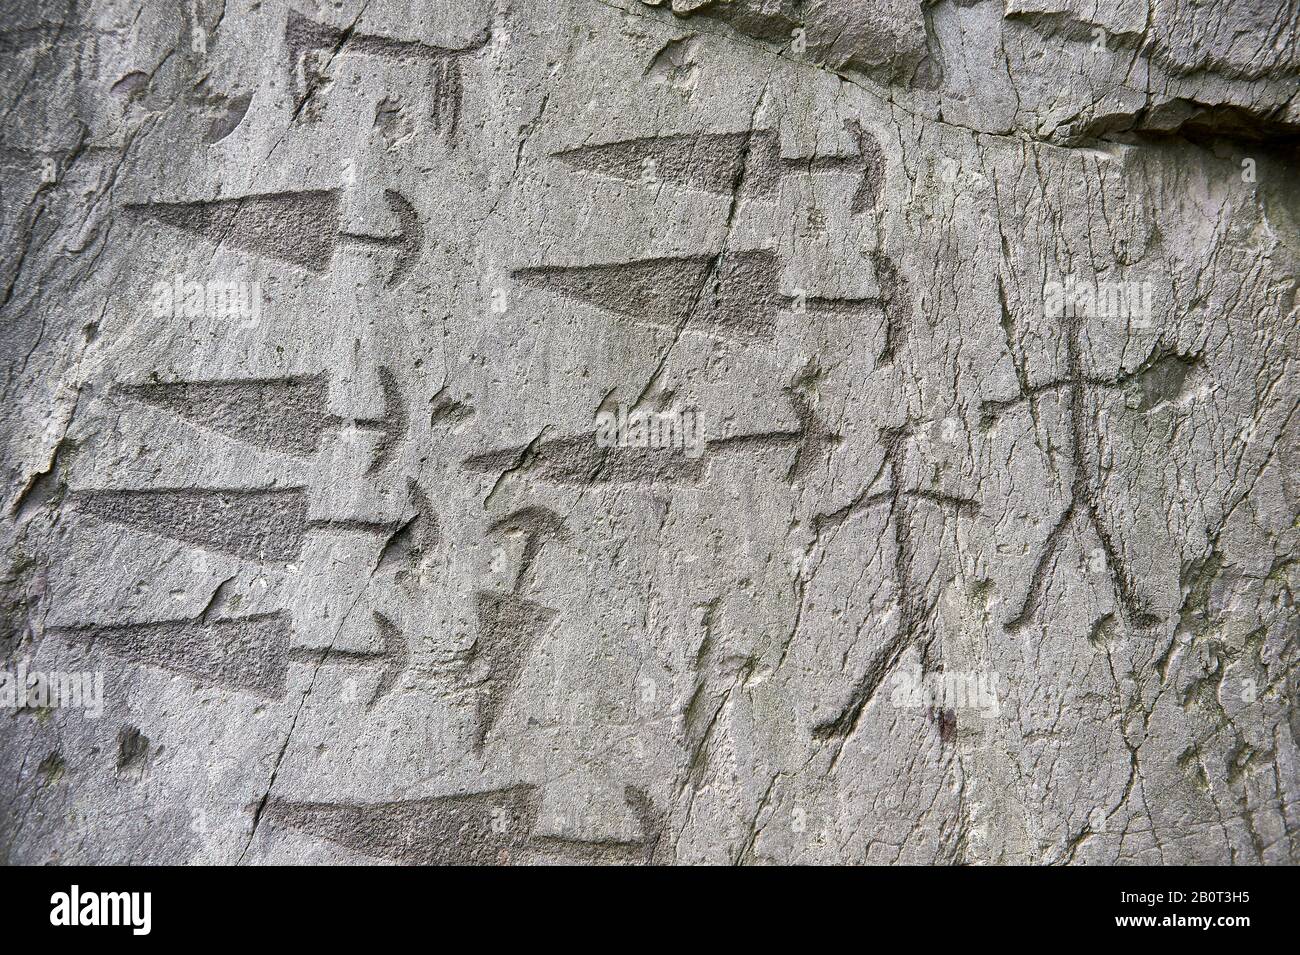 Prehistoric  petroglyphs, rock carvings, detail of of trangular daggers with semi circular pomels and schematic depictions of human figures in an anci Stock Photo